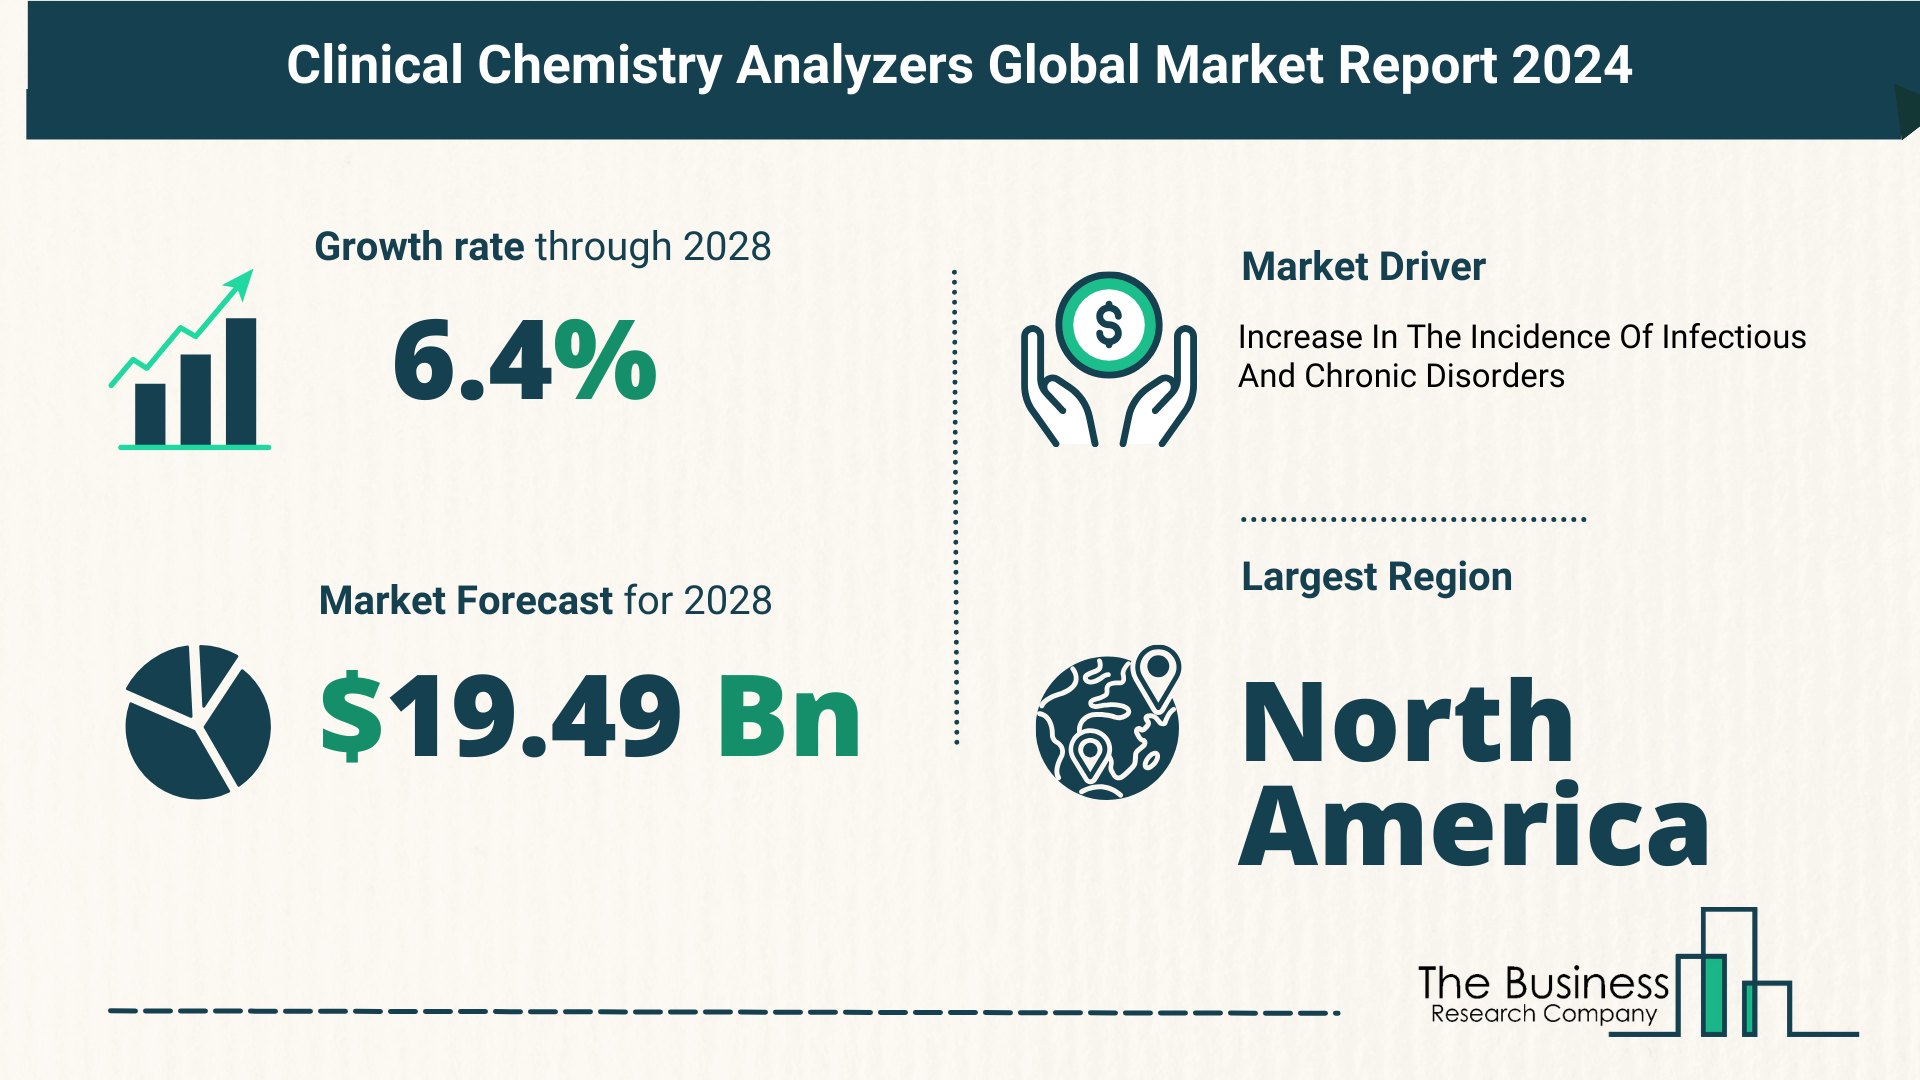 Key Trends And Drivers In The Clinical Chemistry Analyzers Market 2024